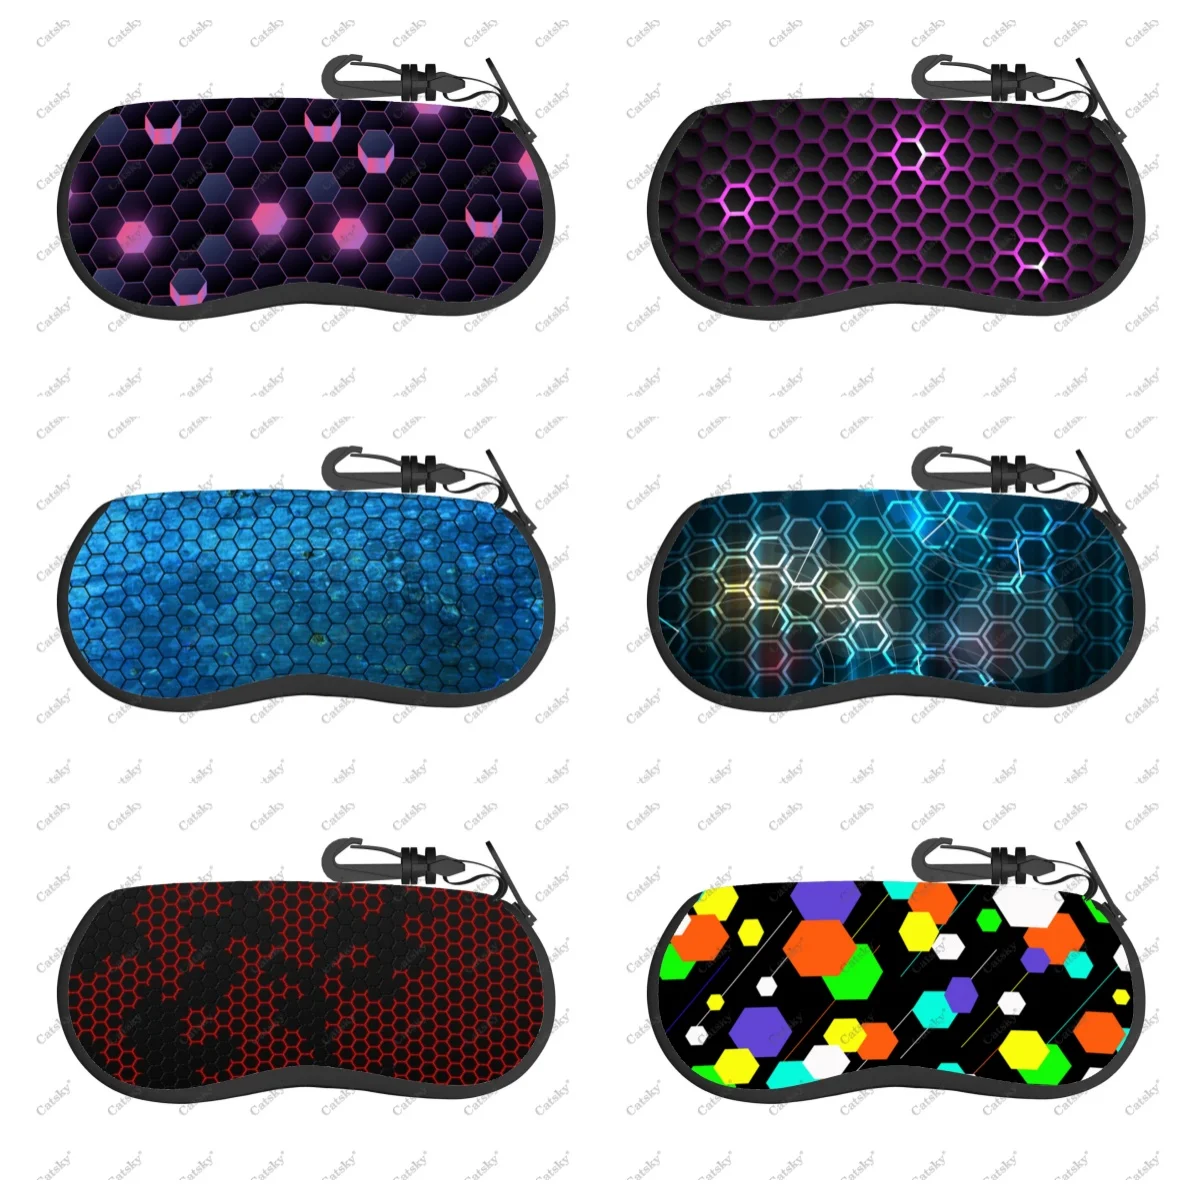 

hexagon honeycomb Glasses case zipper travel printed soft shell suitable for storing pencil bags glasses cases